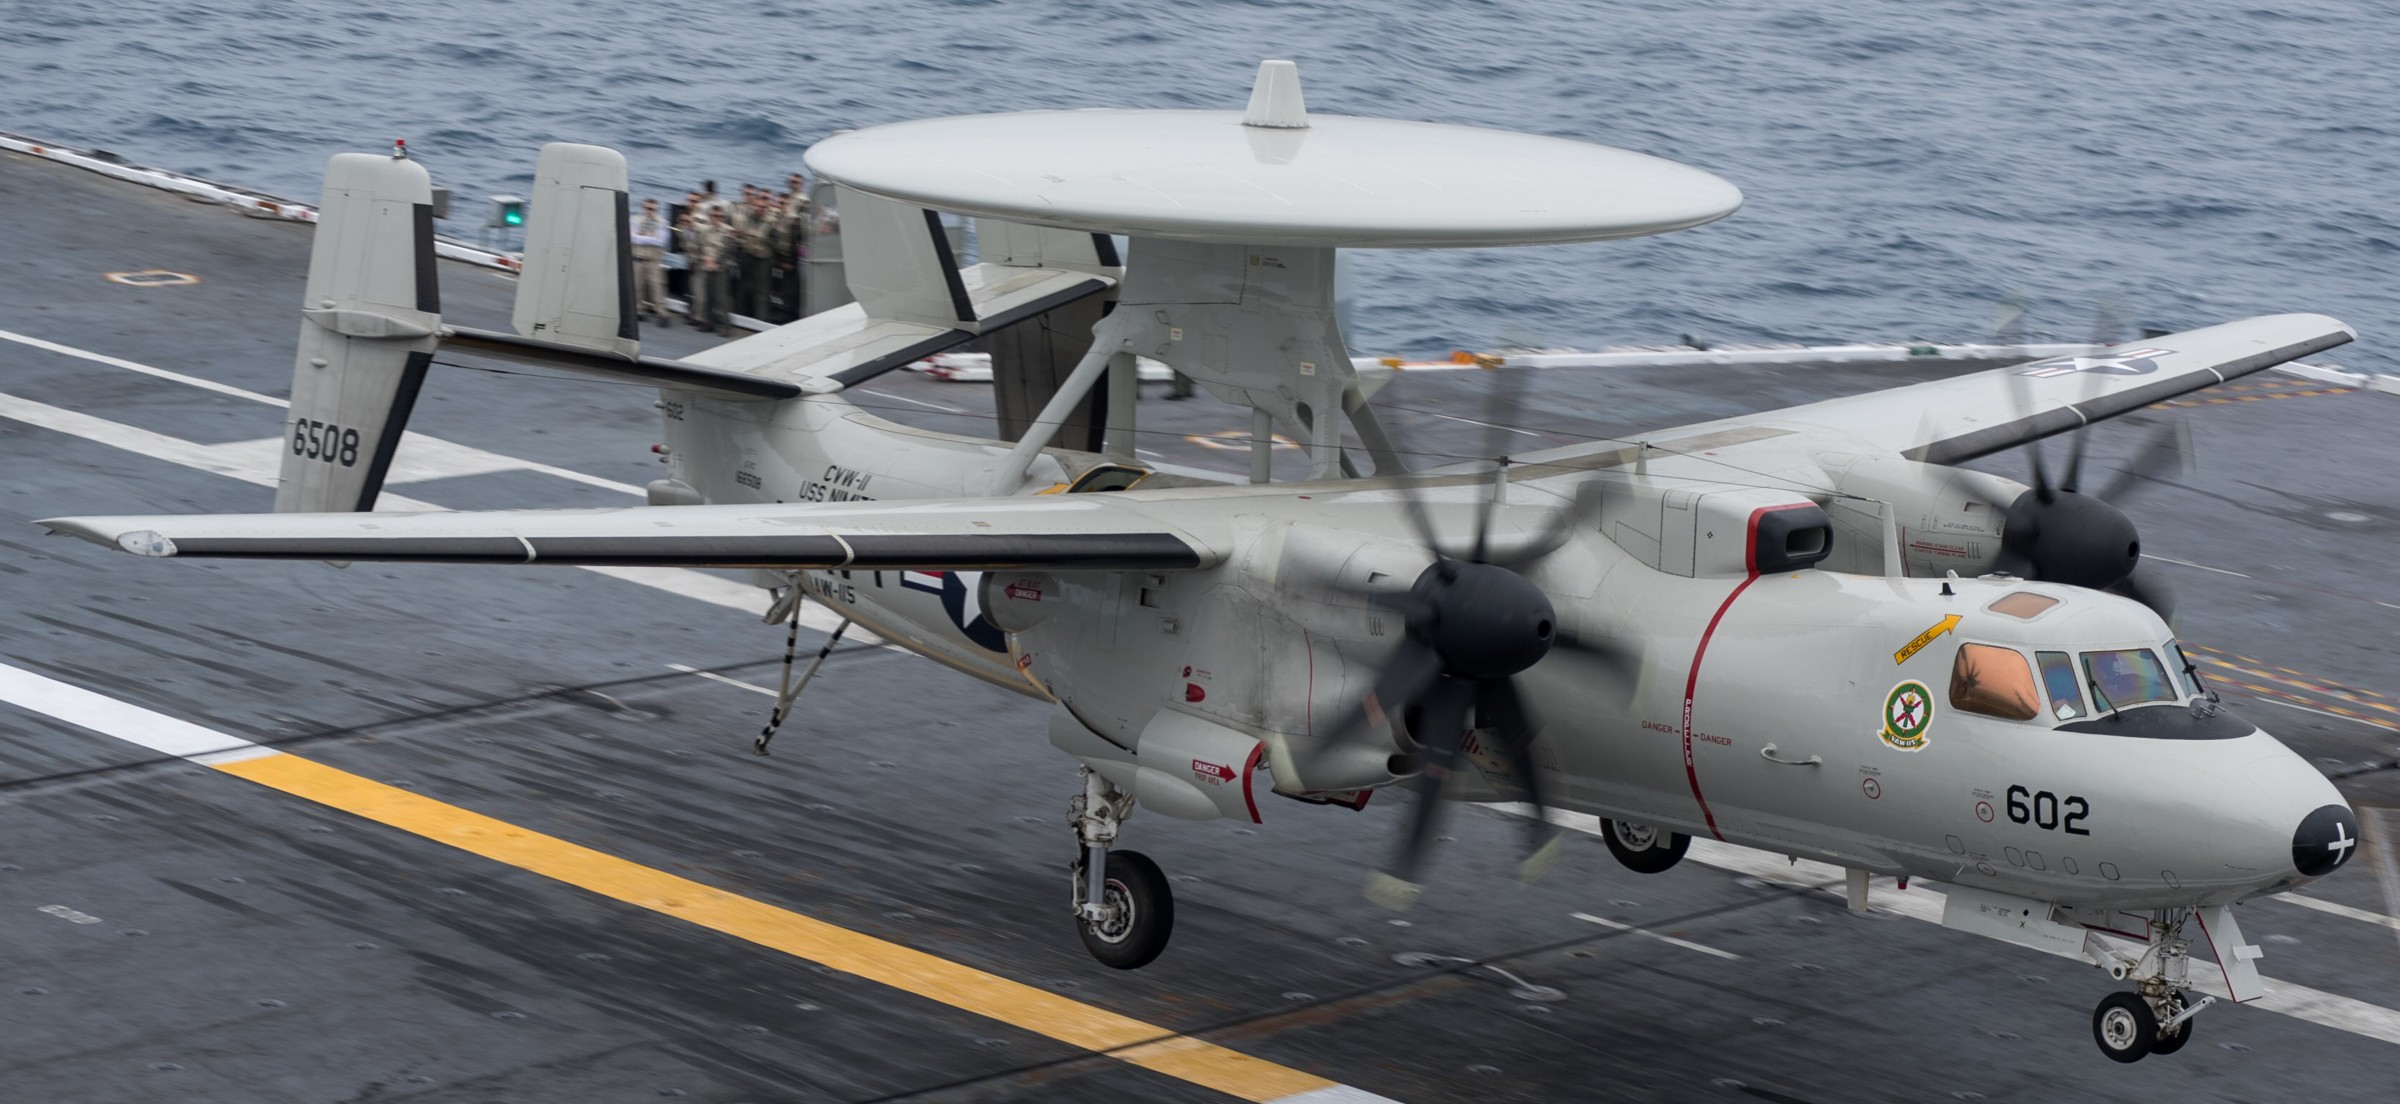 vaw-115 liberty bells carrier airborne early warning squadron us navy grumman e-2c hawkeye 2000 np 111